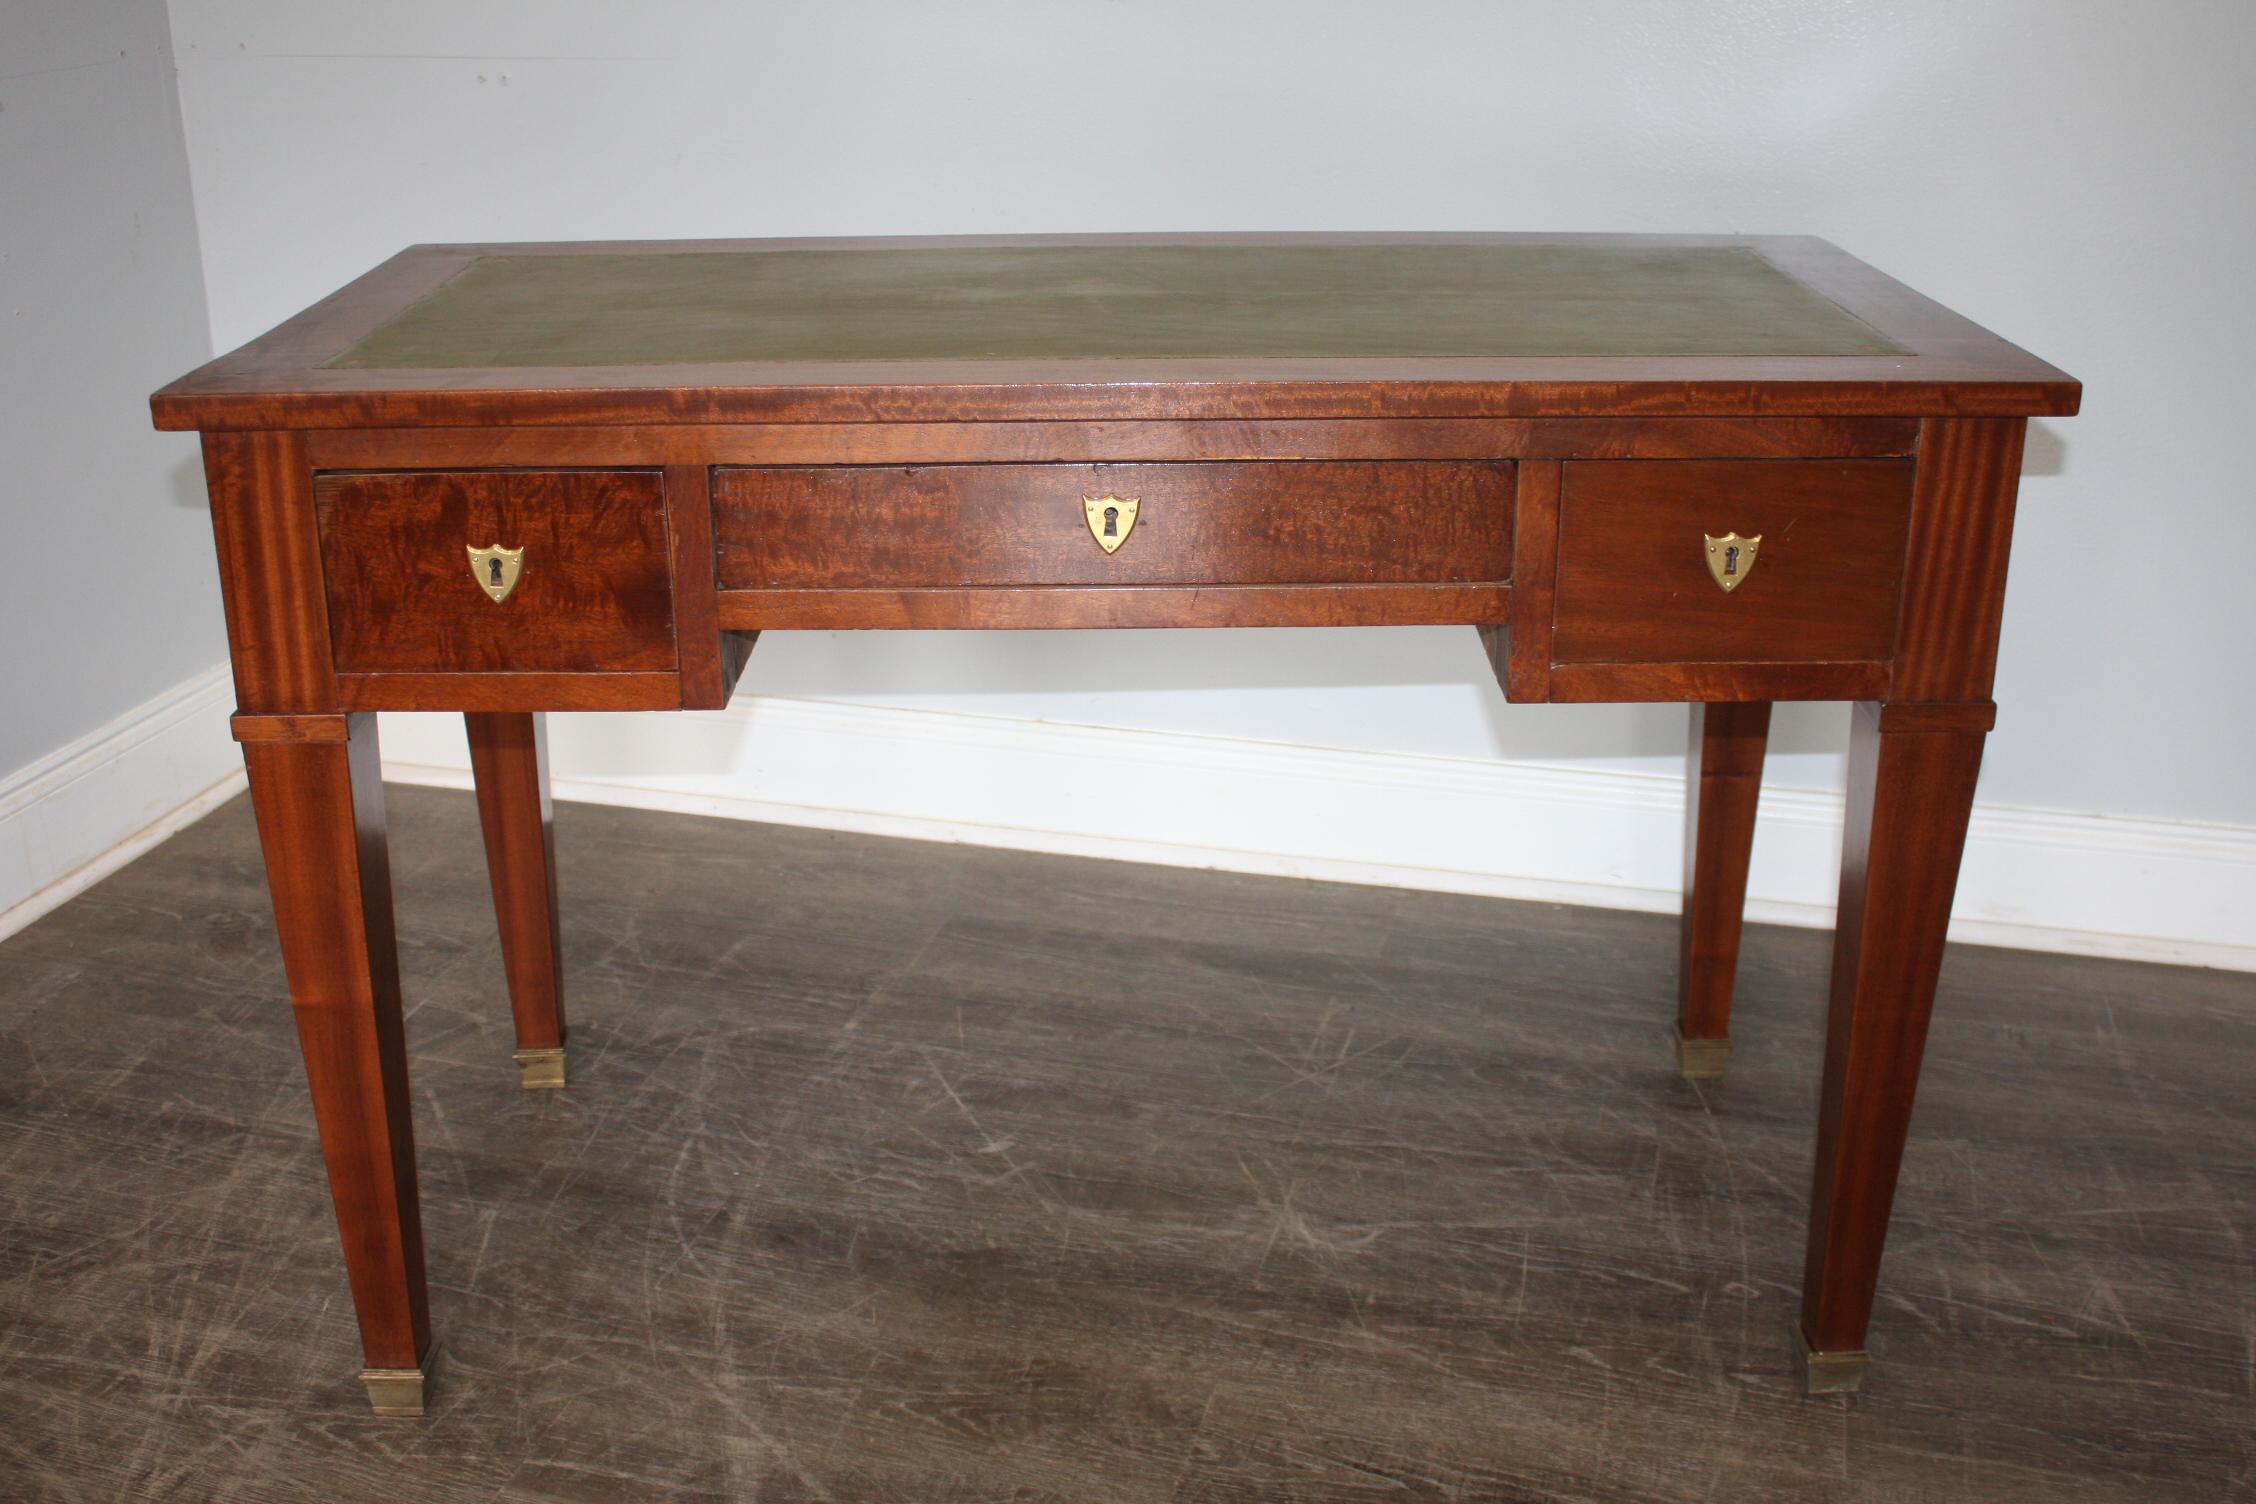 This desk is made of flamed mahogany and a green leather top, it is a Louis XVI style.